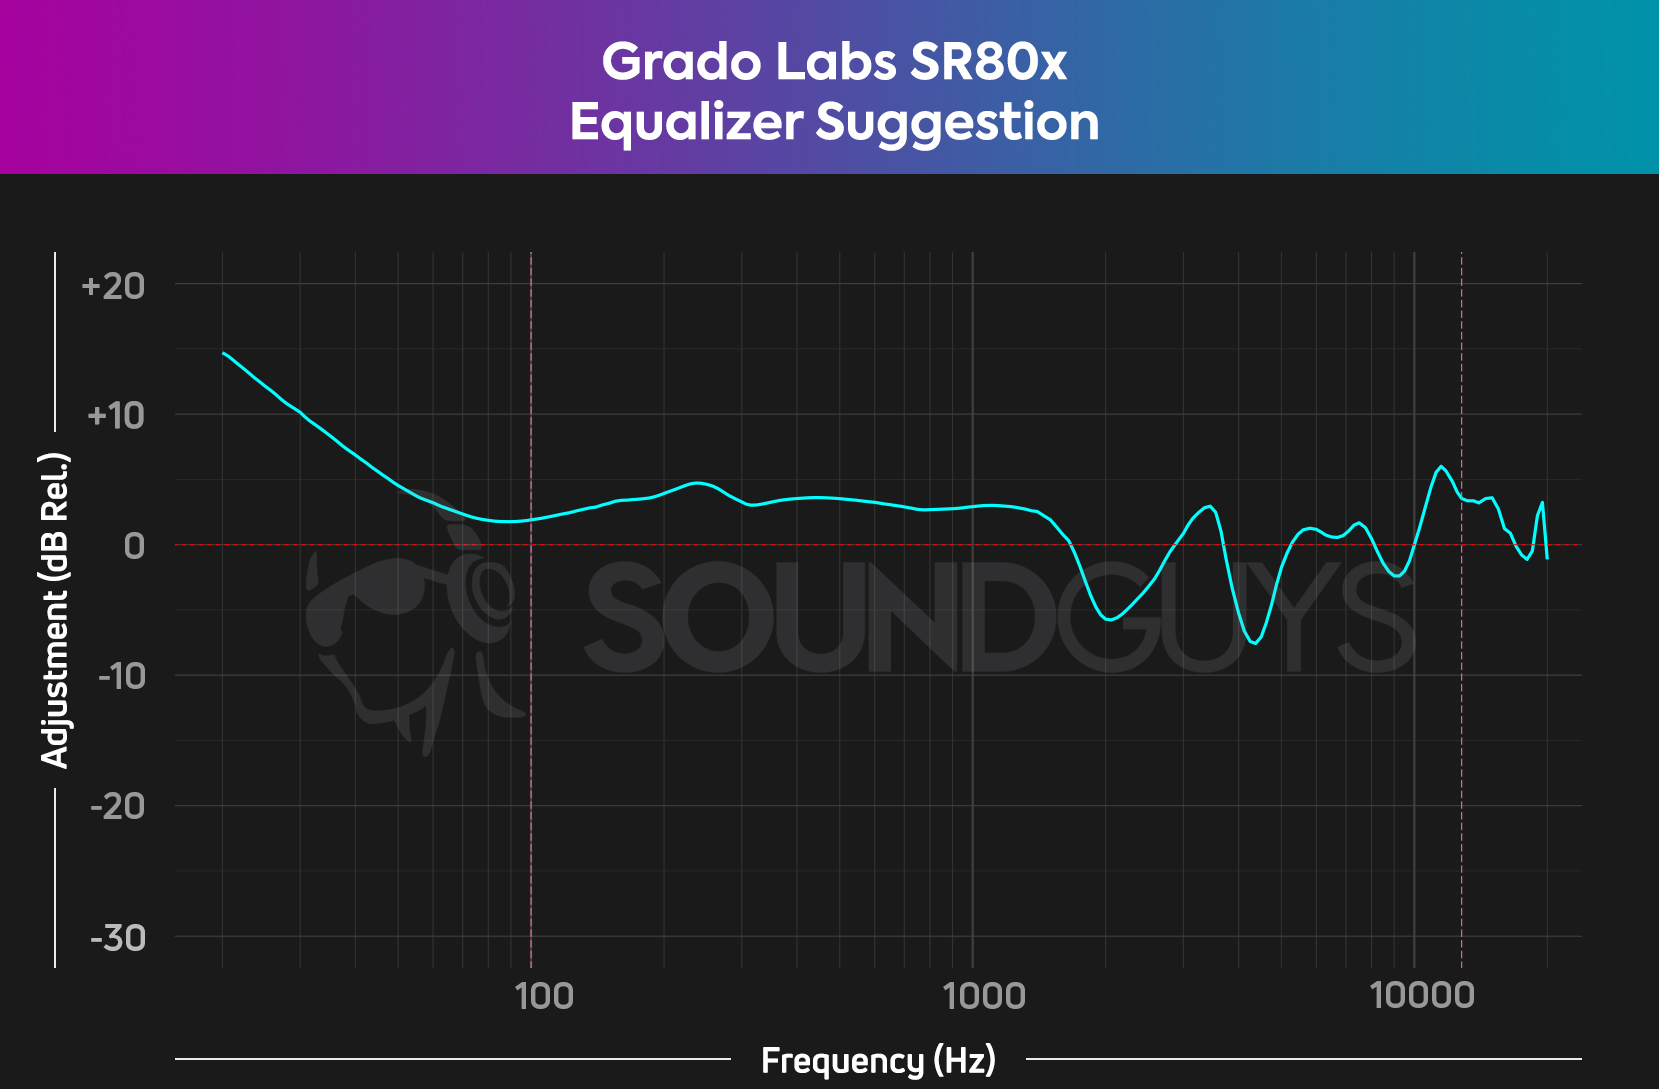 This chart shows our suggested EQ settings for the Grado Labs SR80x.